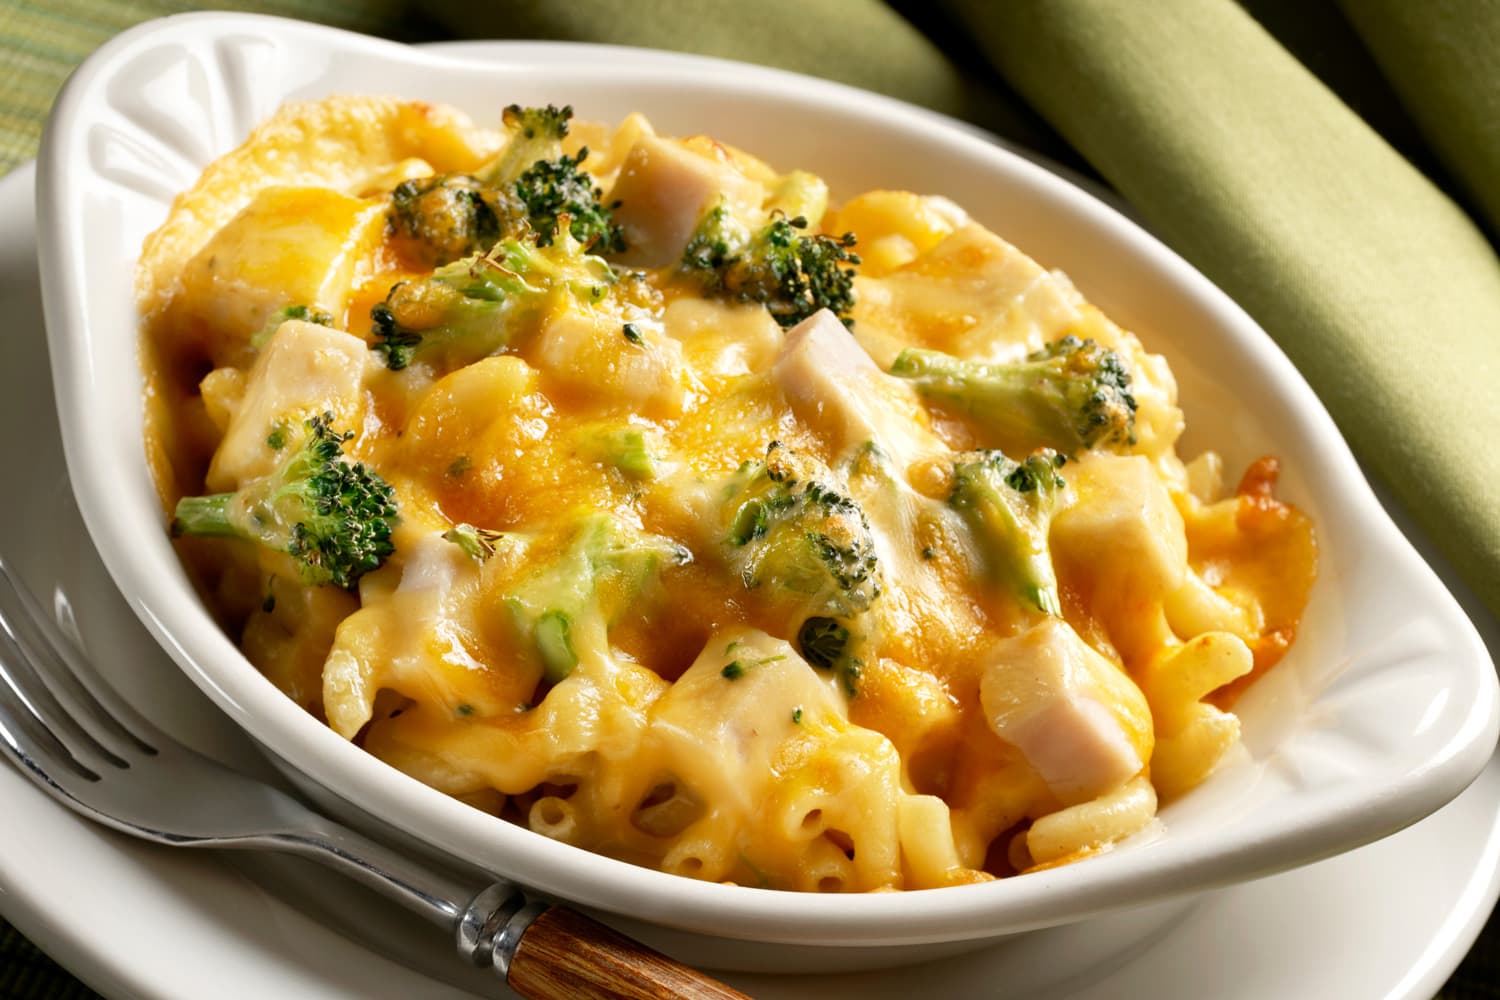 Single serve casserole of baked elbow macaroni with chopped broccoli and cubed chicken breast topped with cheddar cheese and backed until hot and melted